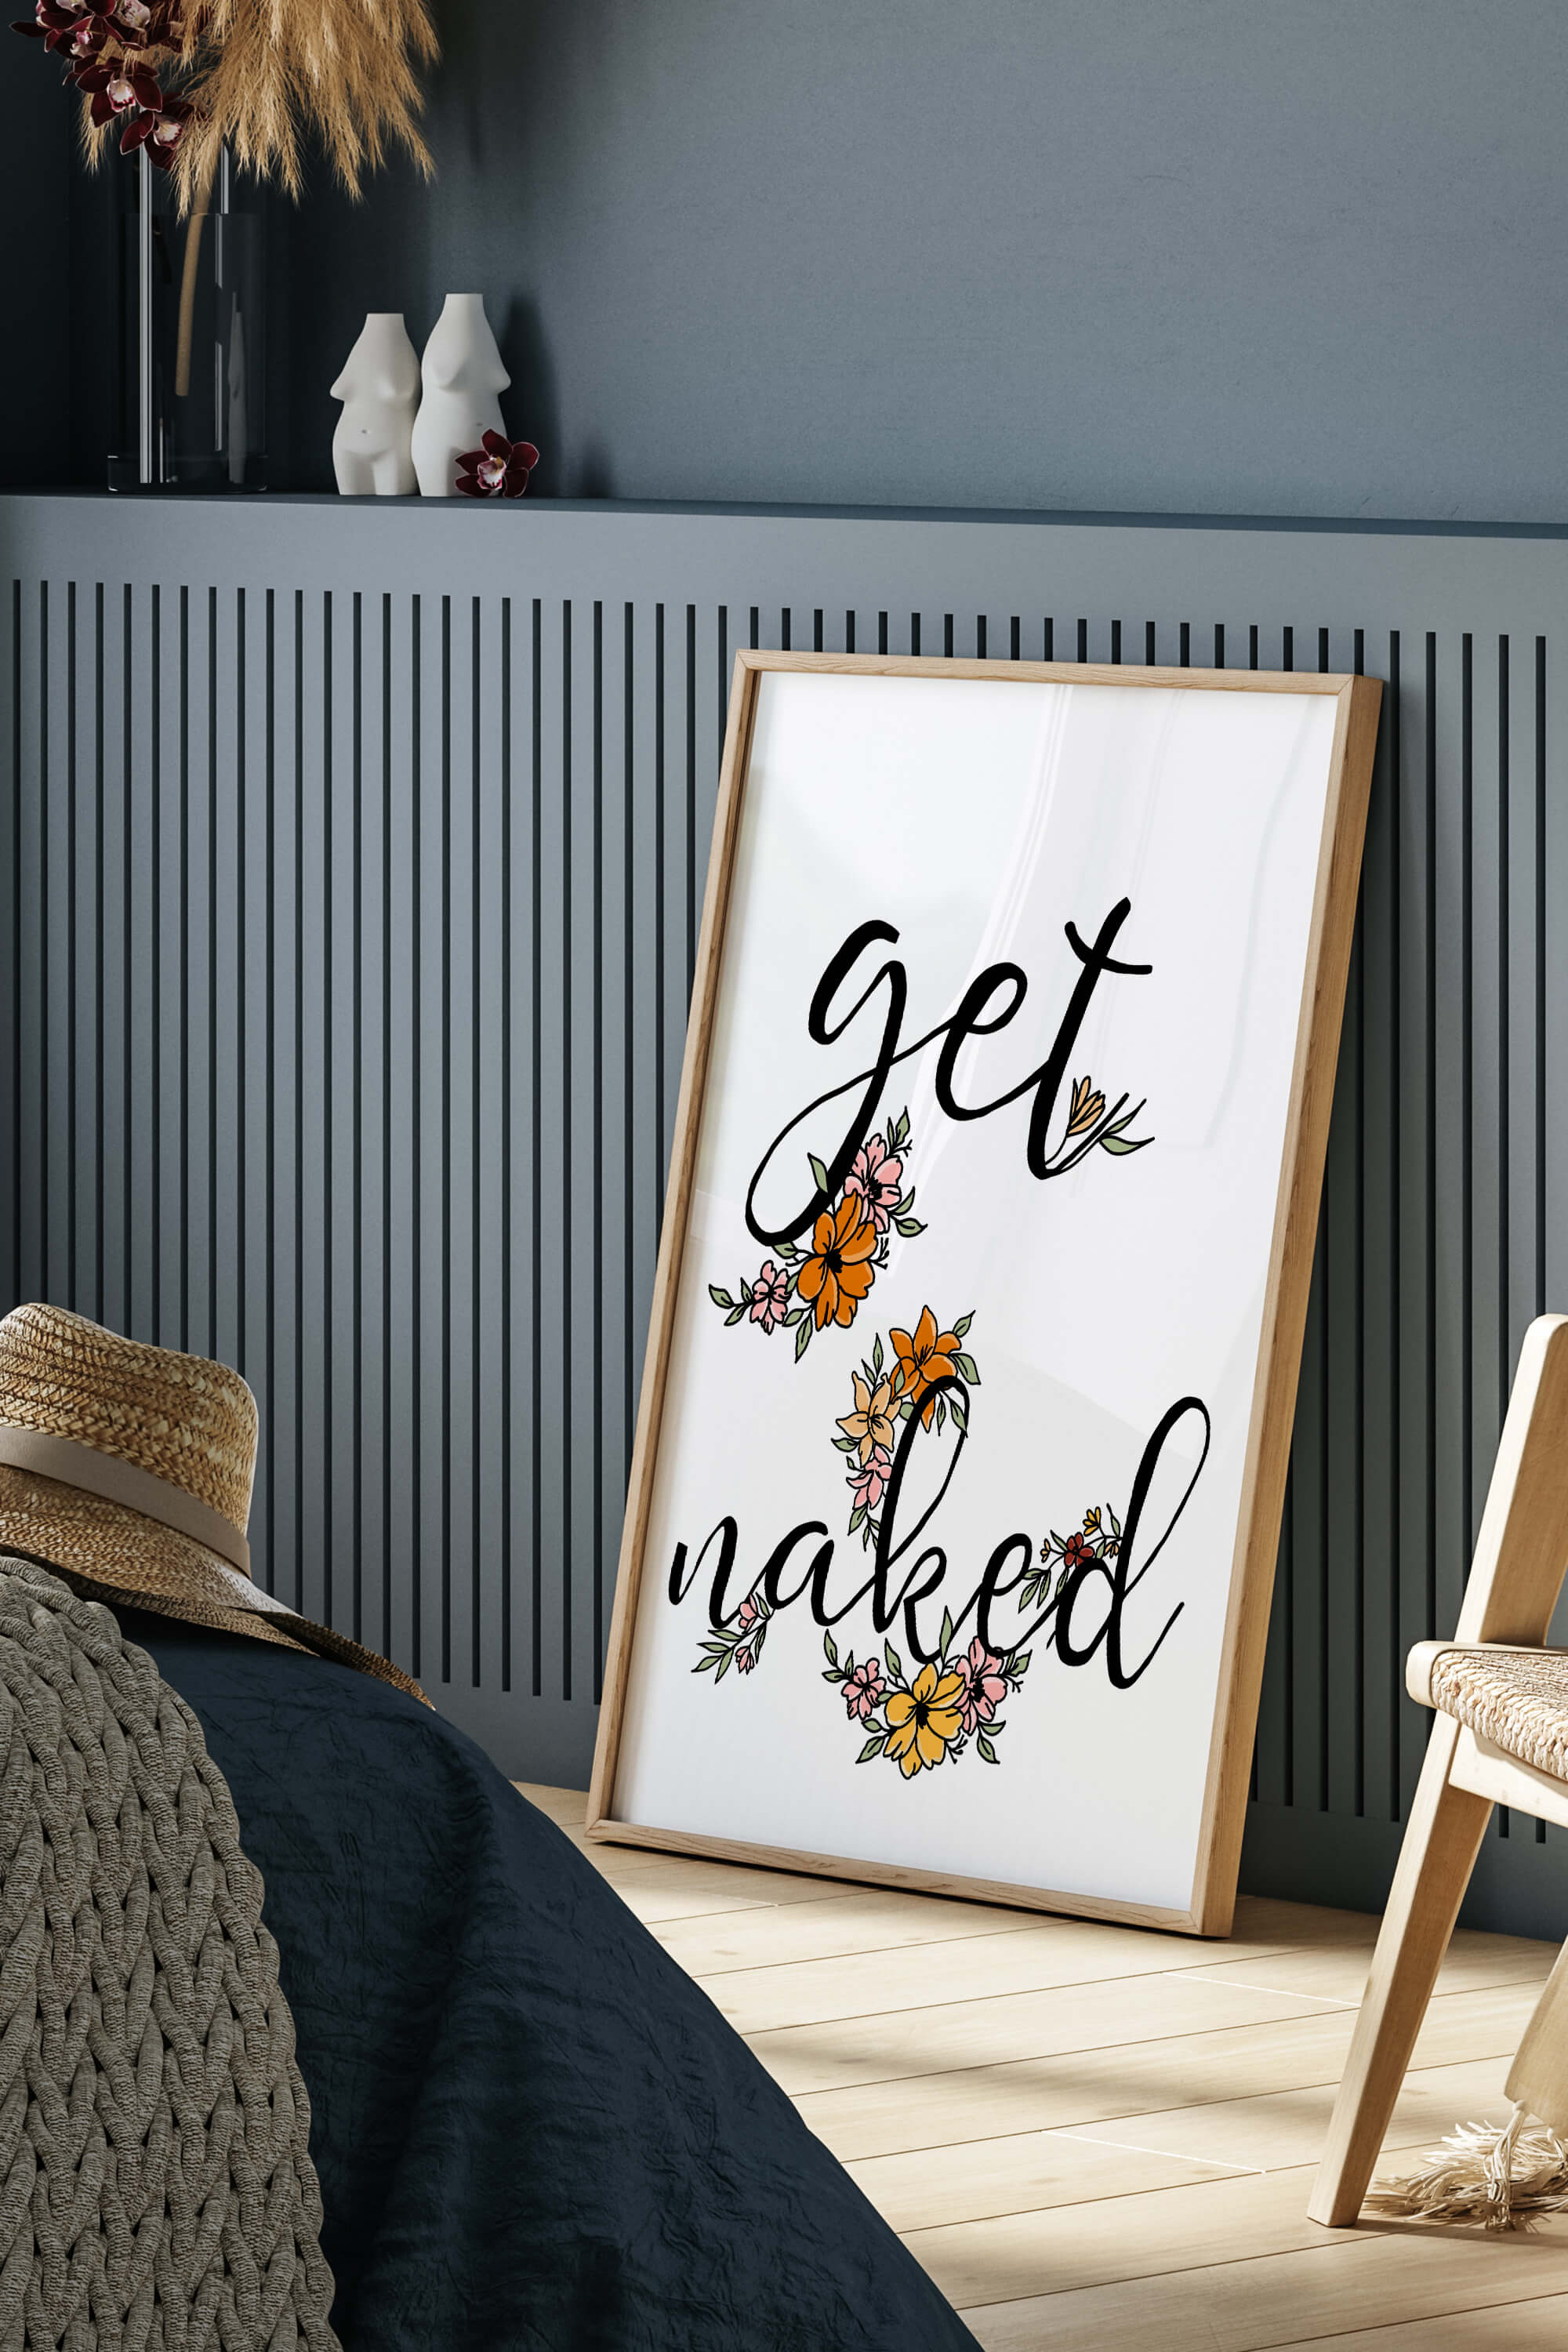 Embrace positivity with this extraordinary art print. A floral nude be-naked quote poster that exudes style and individuality. Own a piece that not only decorates but also inspires, making each day extraordinary.